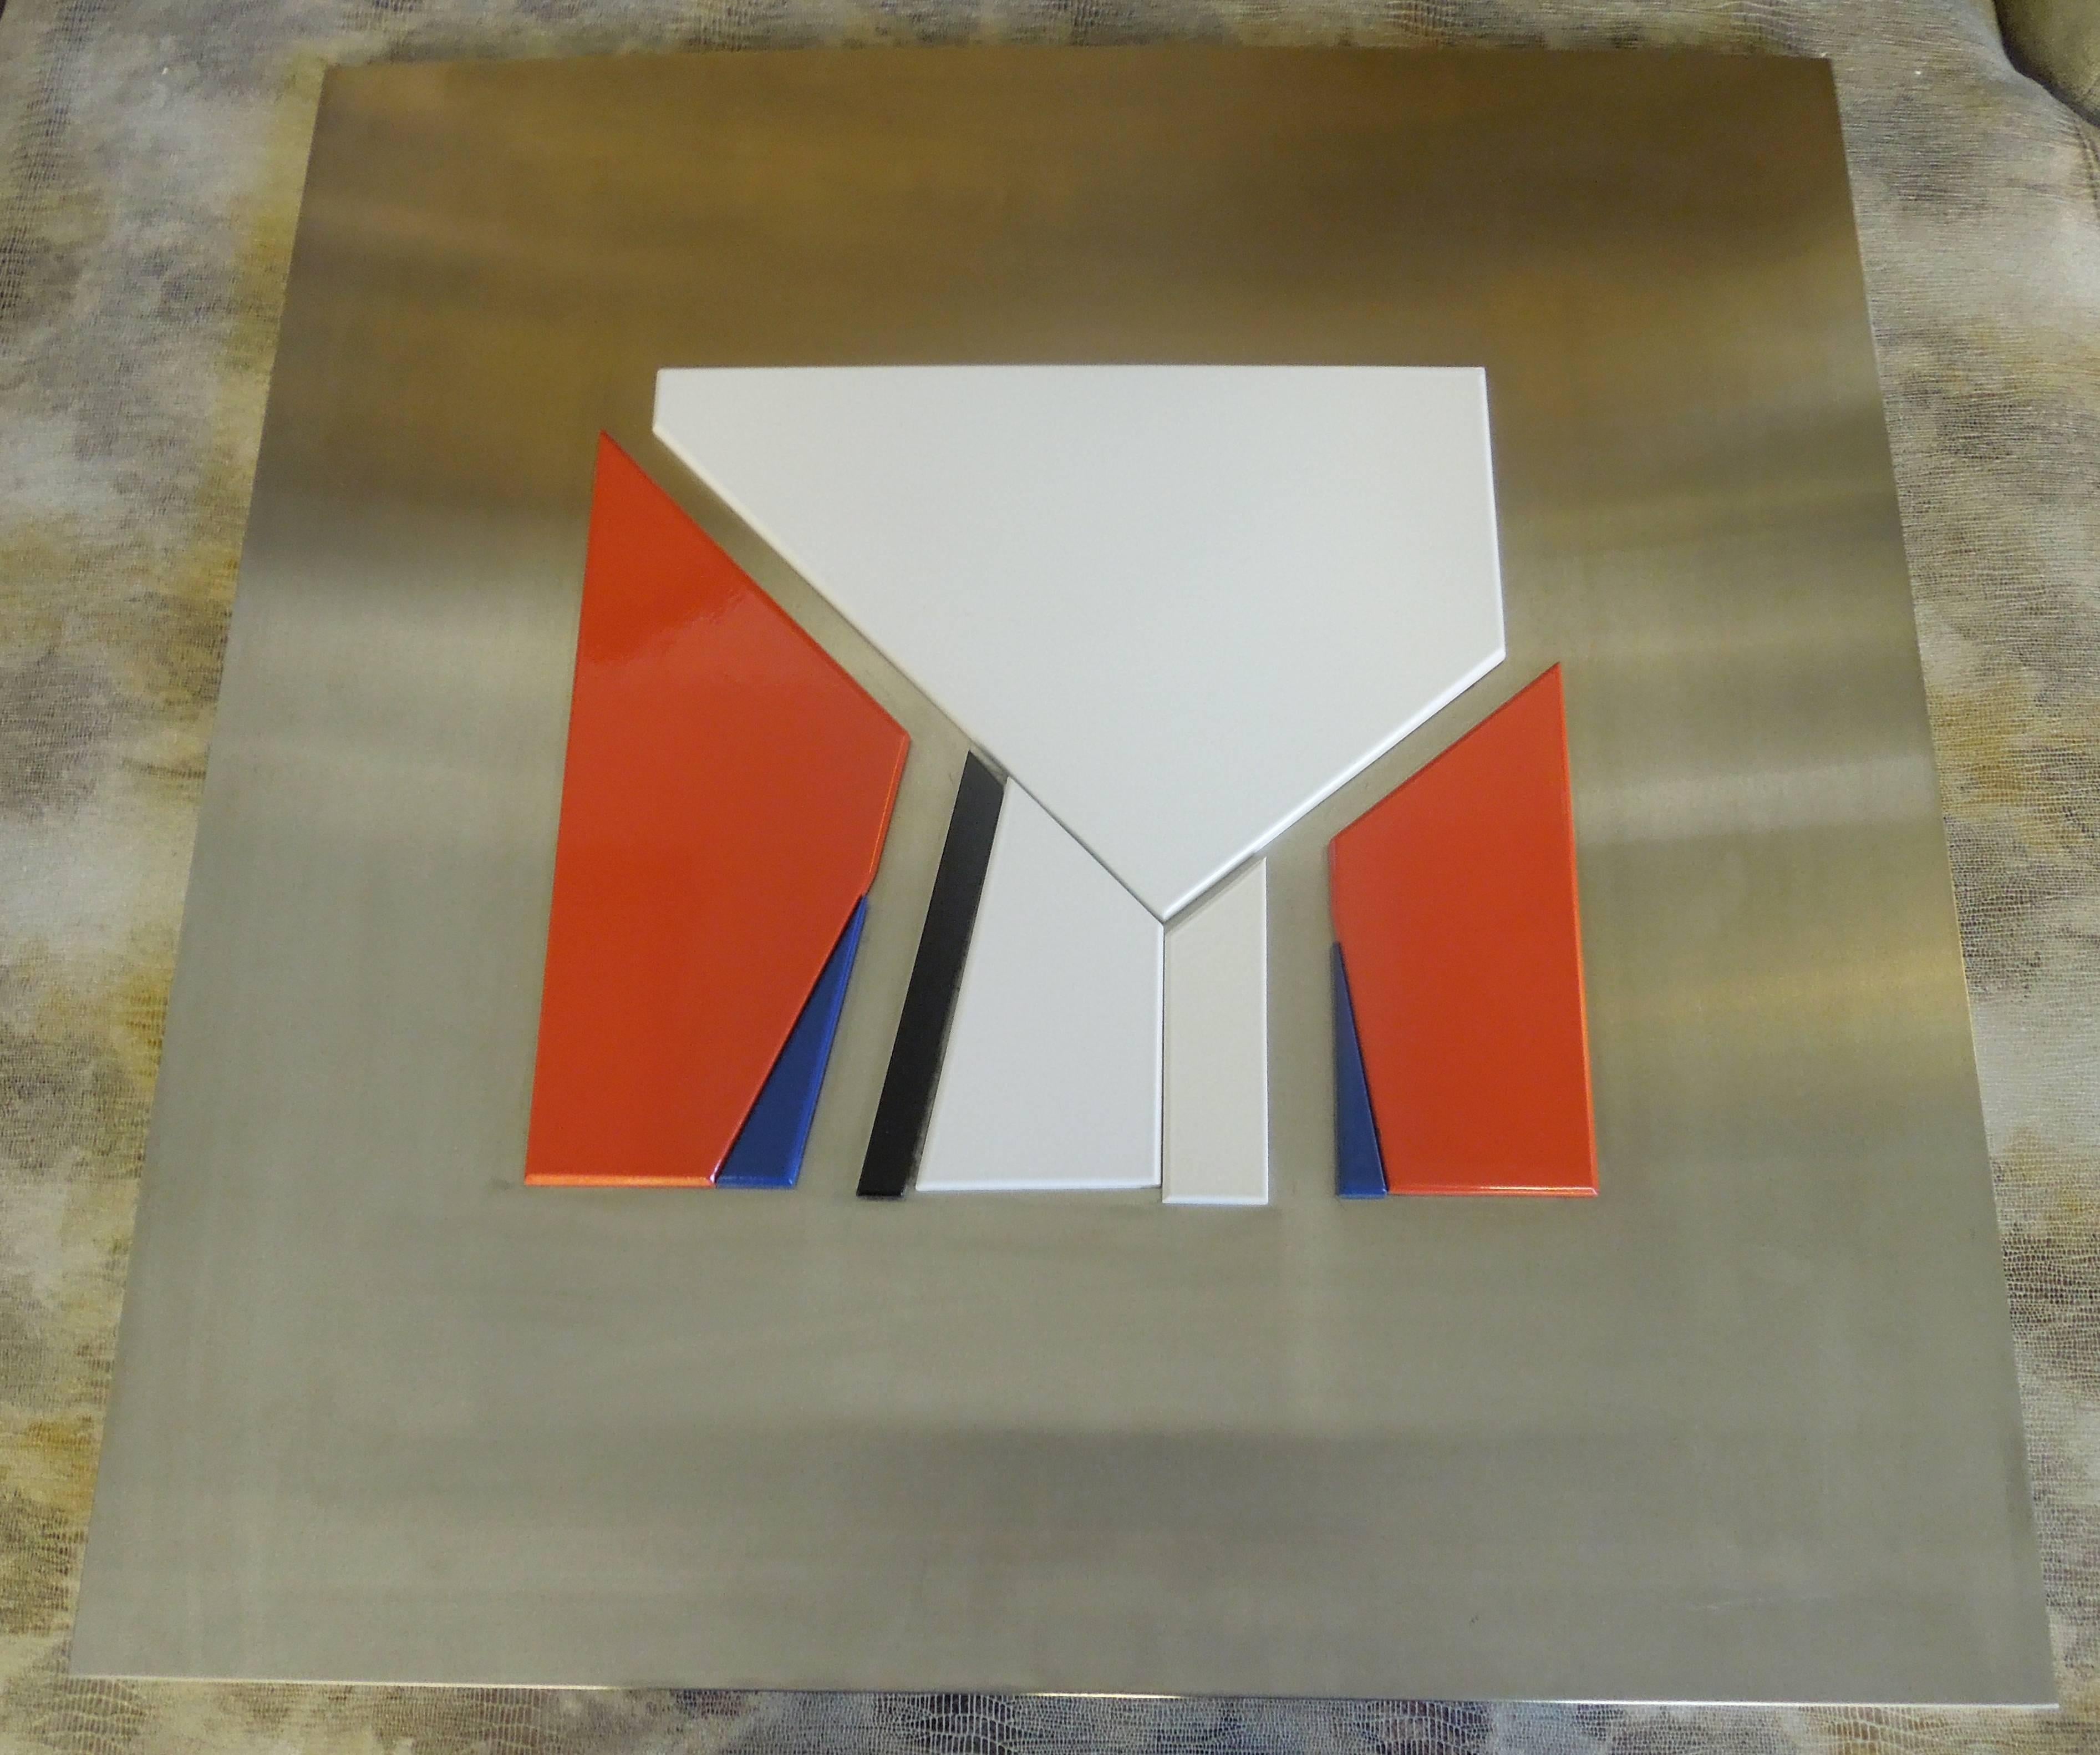 Jean Baier (1932-1999) was a Swiss modernist painter and sculpture. This rare piece from Galerie Ziegler in Geneva, Switzerland, 1971 show. On stainless steel, are ten lacquered wood pieces. White, creme, black, read and navy blue. Numbered 167/300